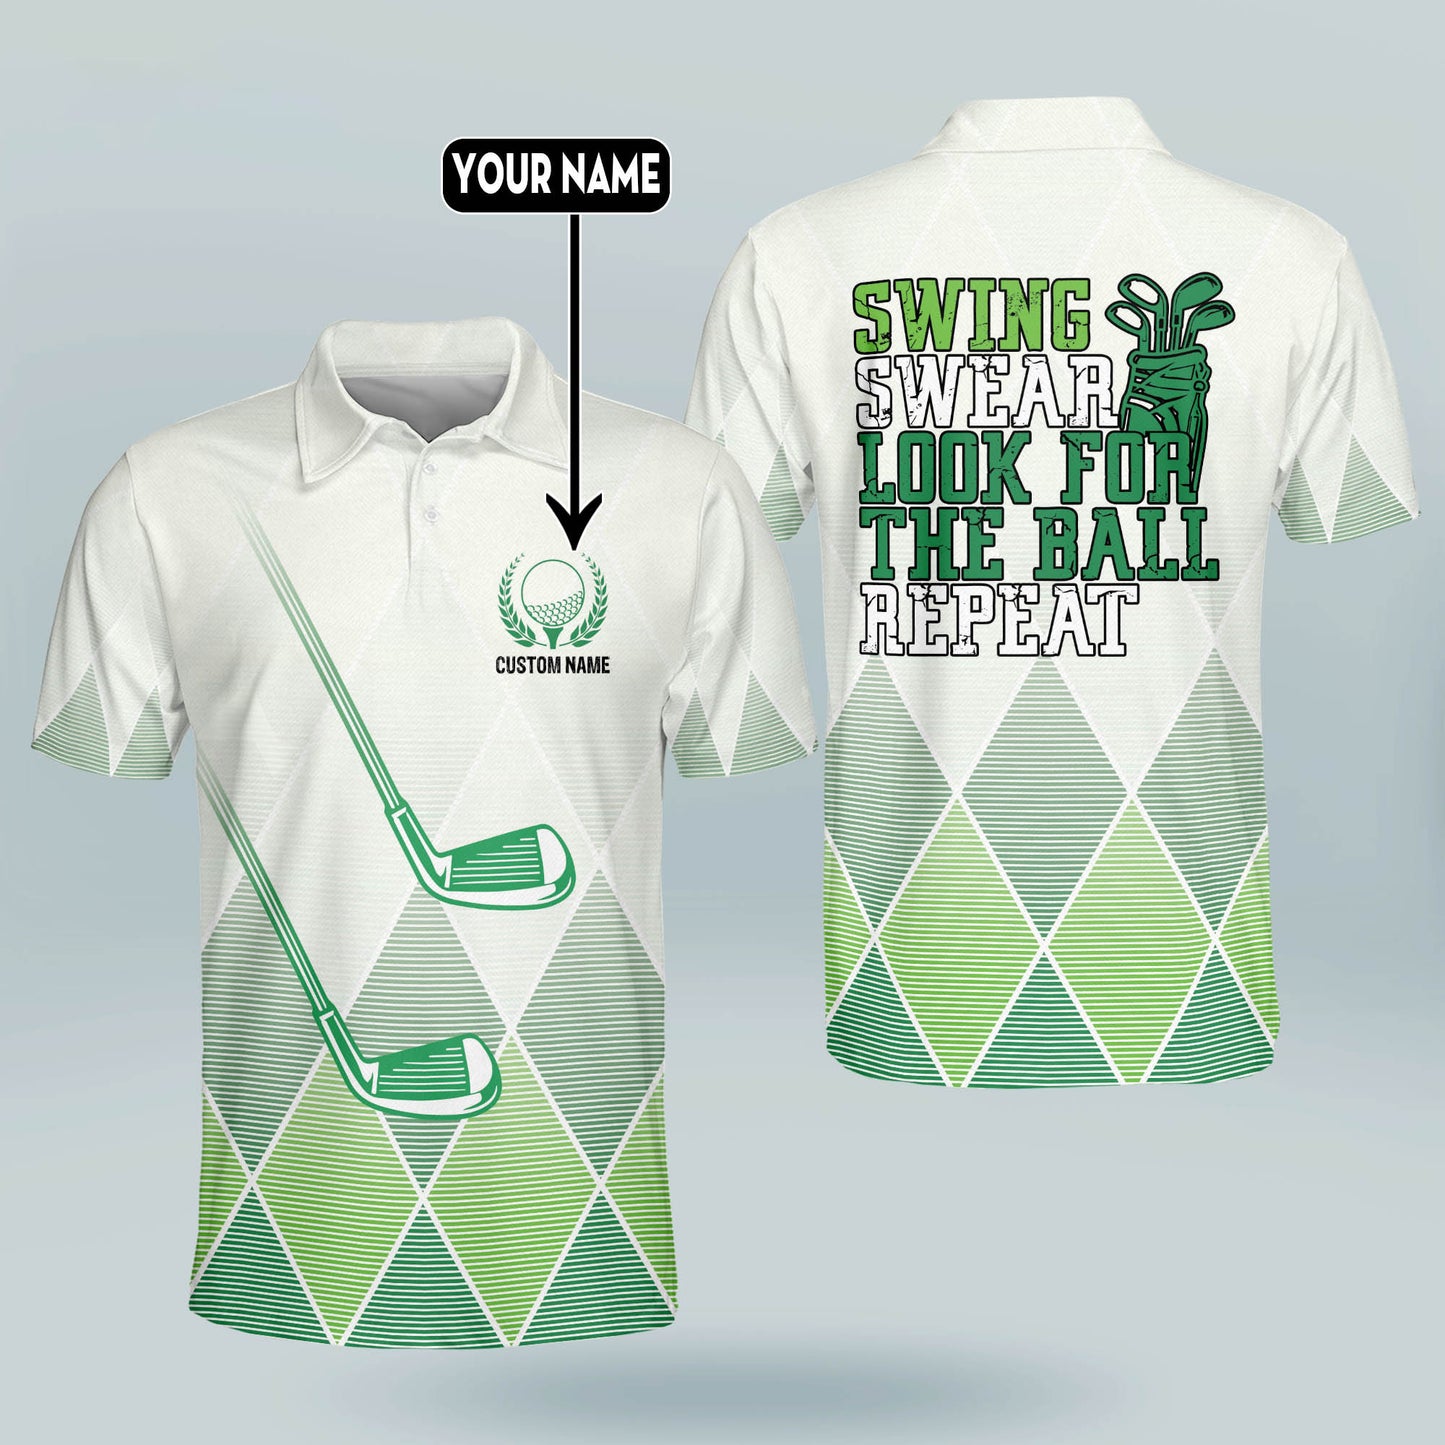 Swing Swear Look for Ball Repeat Golf Polo Shirt GM0319